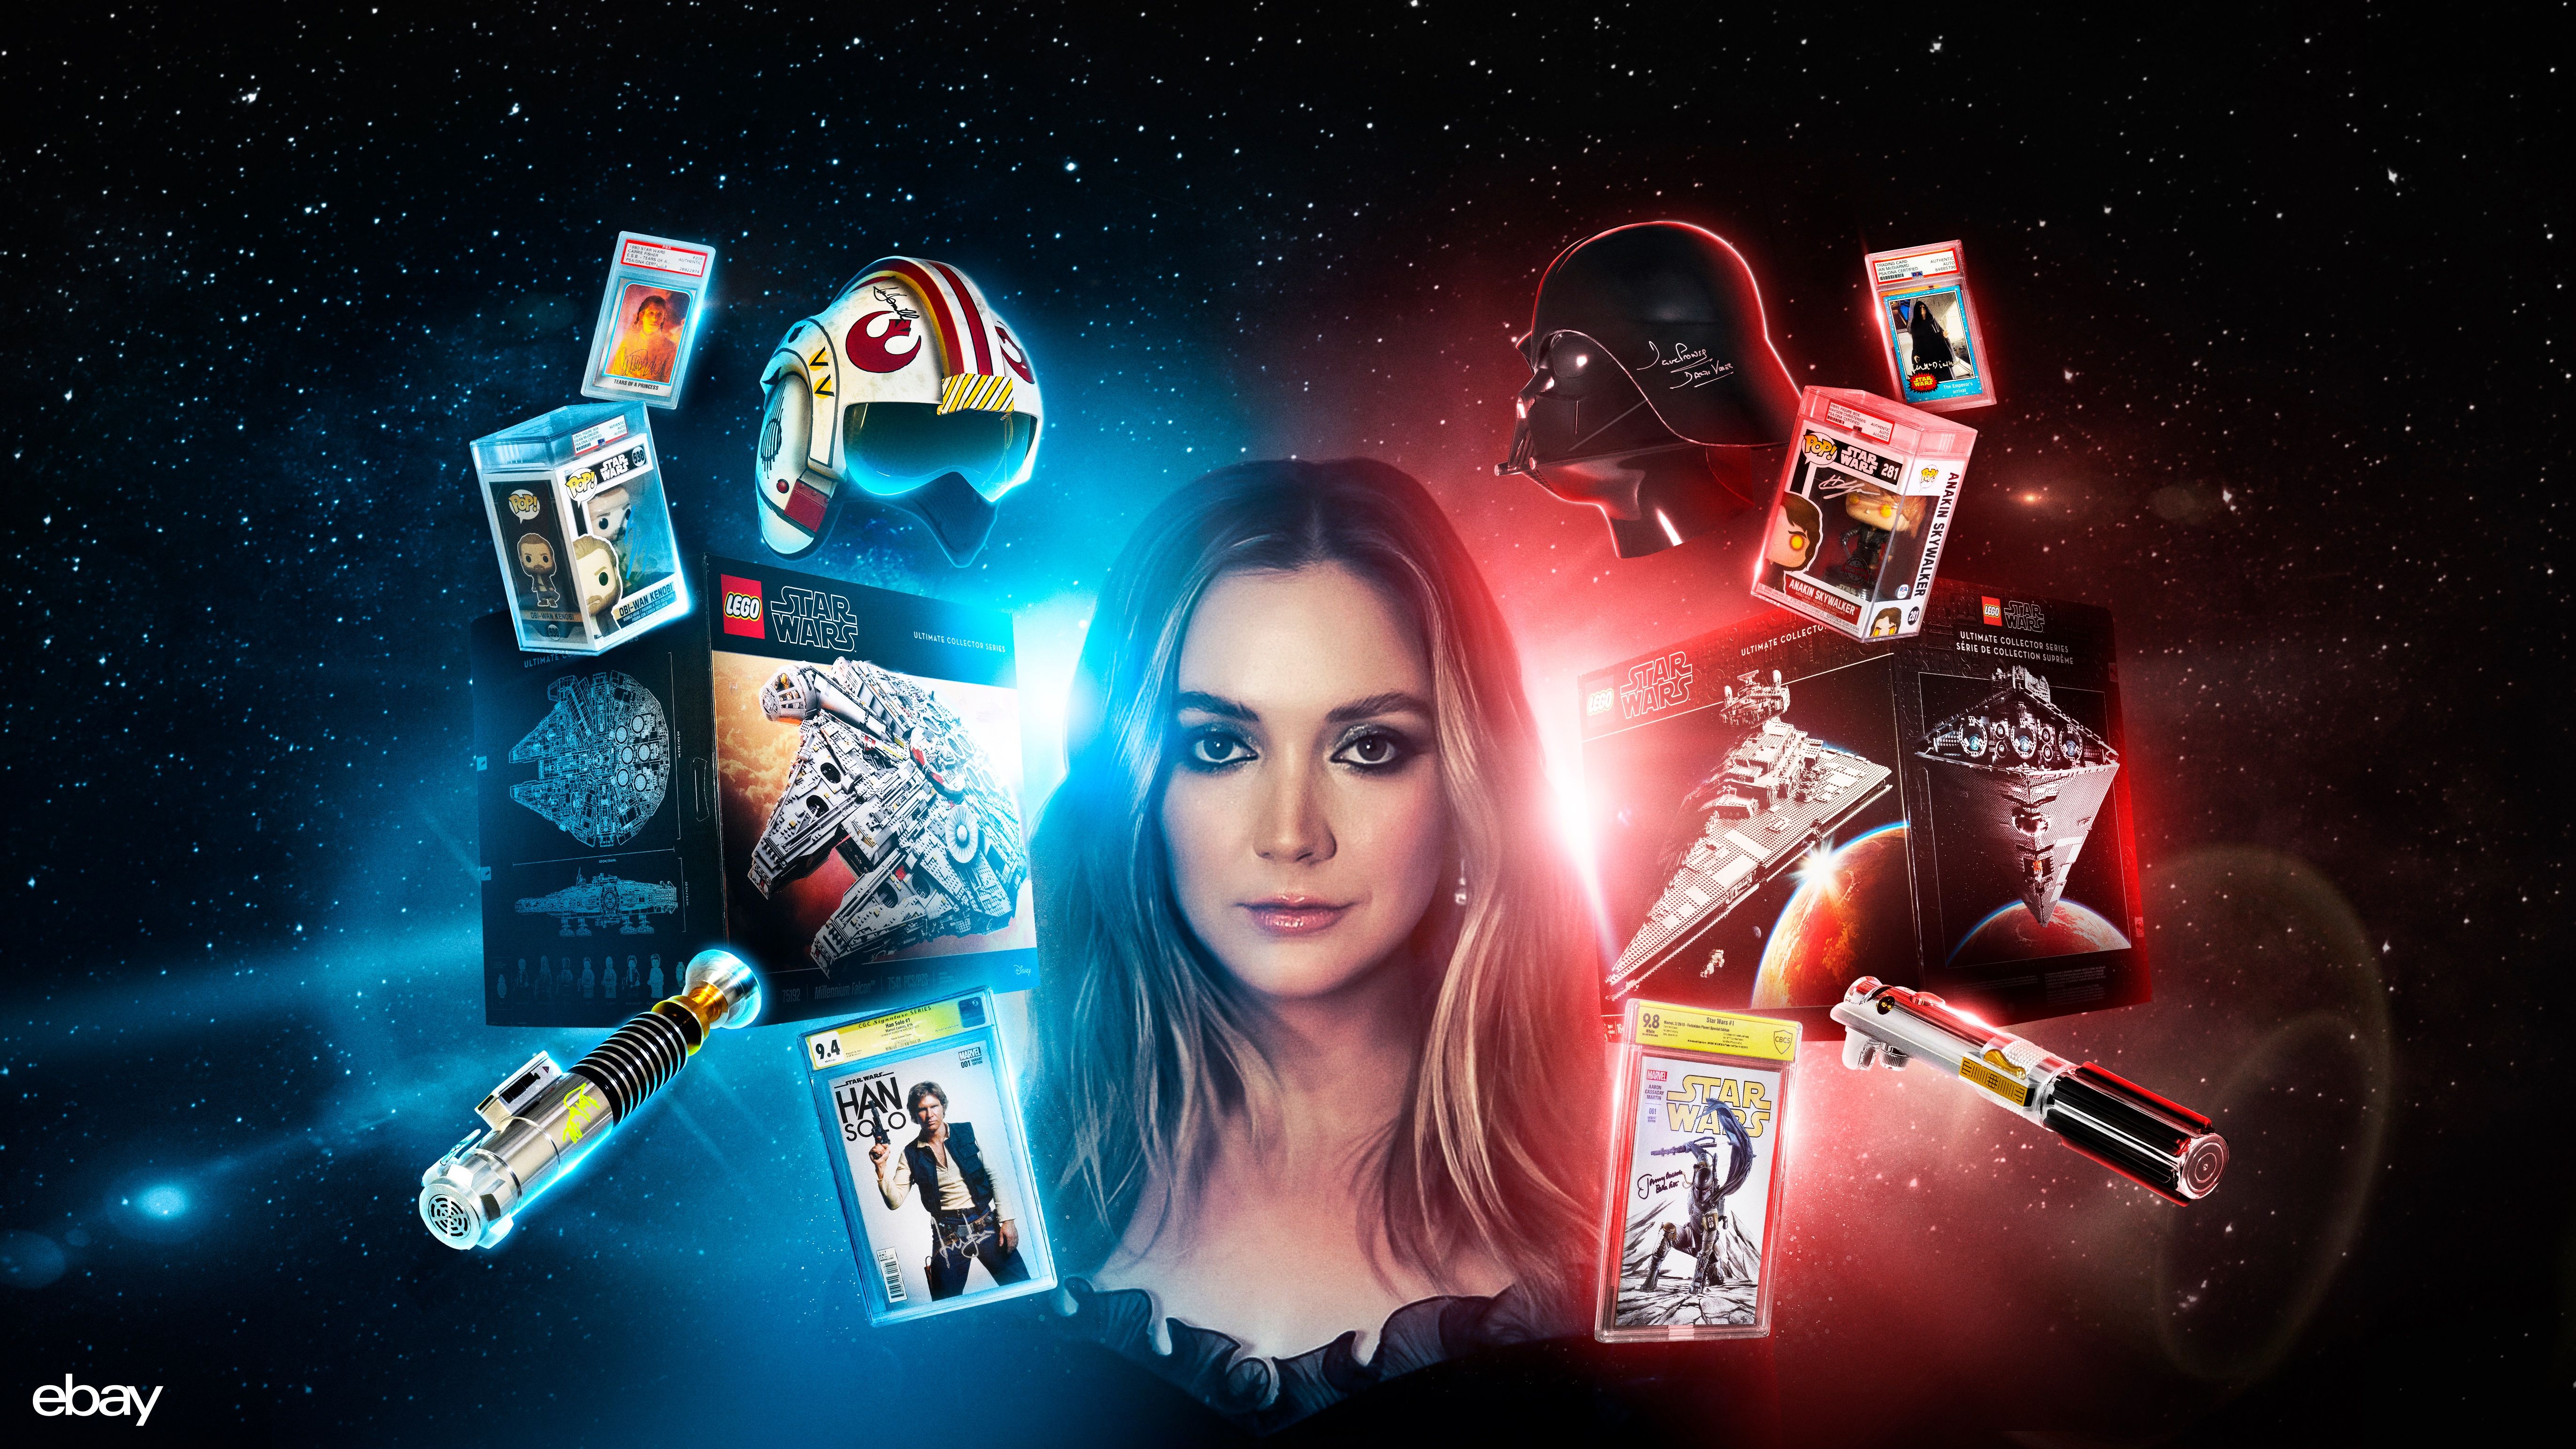 Ebay Celebrates Star Wars Day With The Ultimate Auction - Courtesy Of Billie Lourd Herself